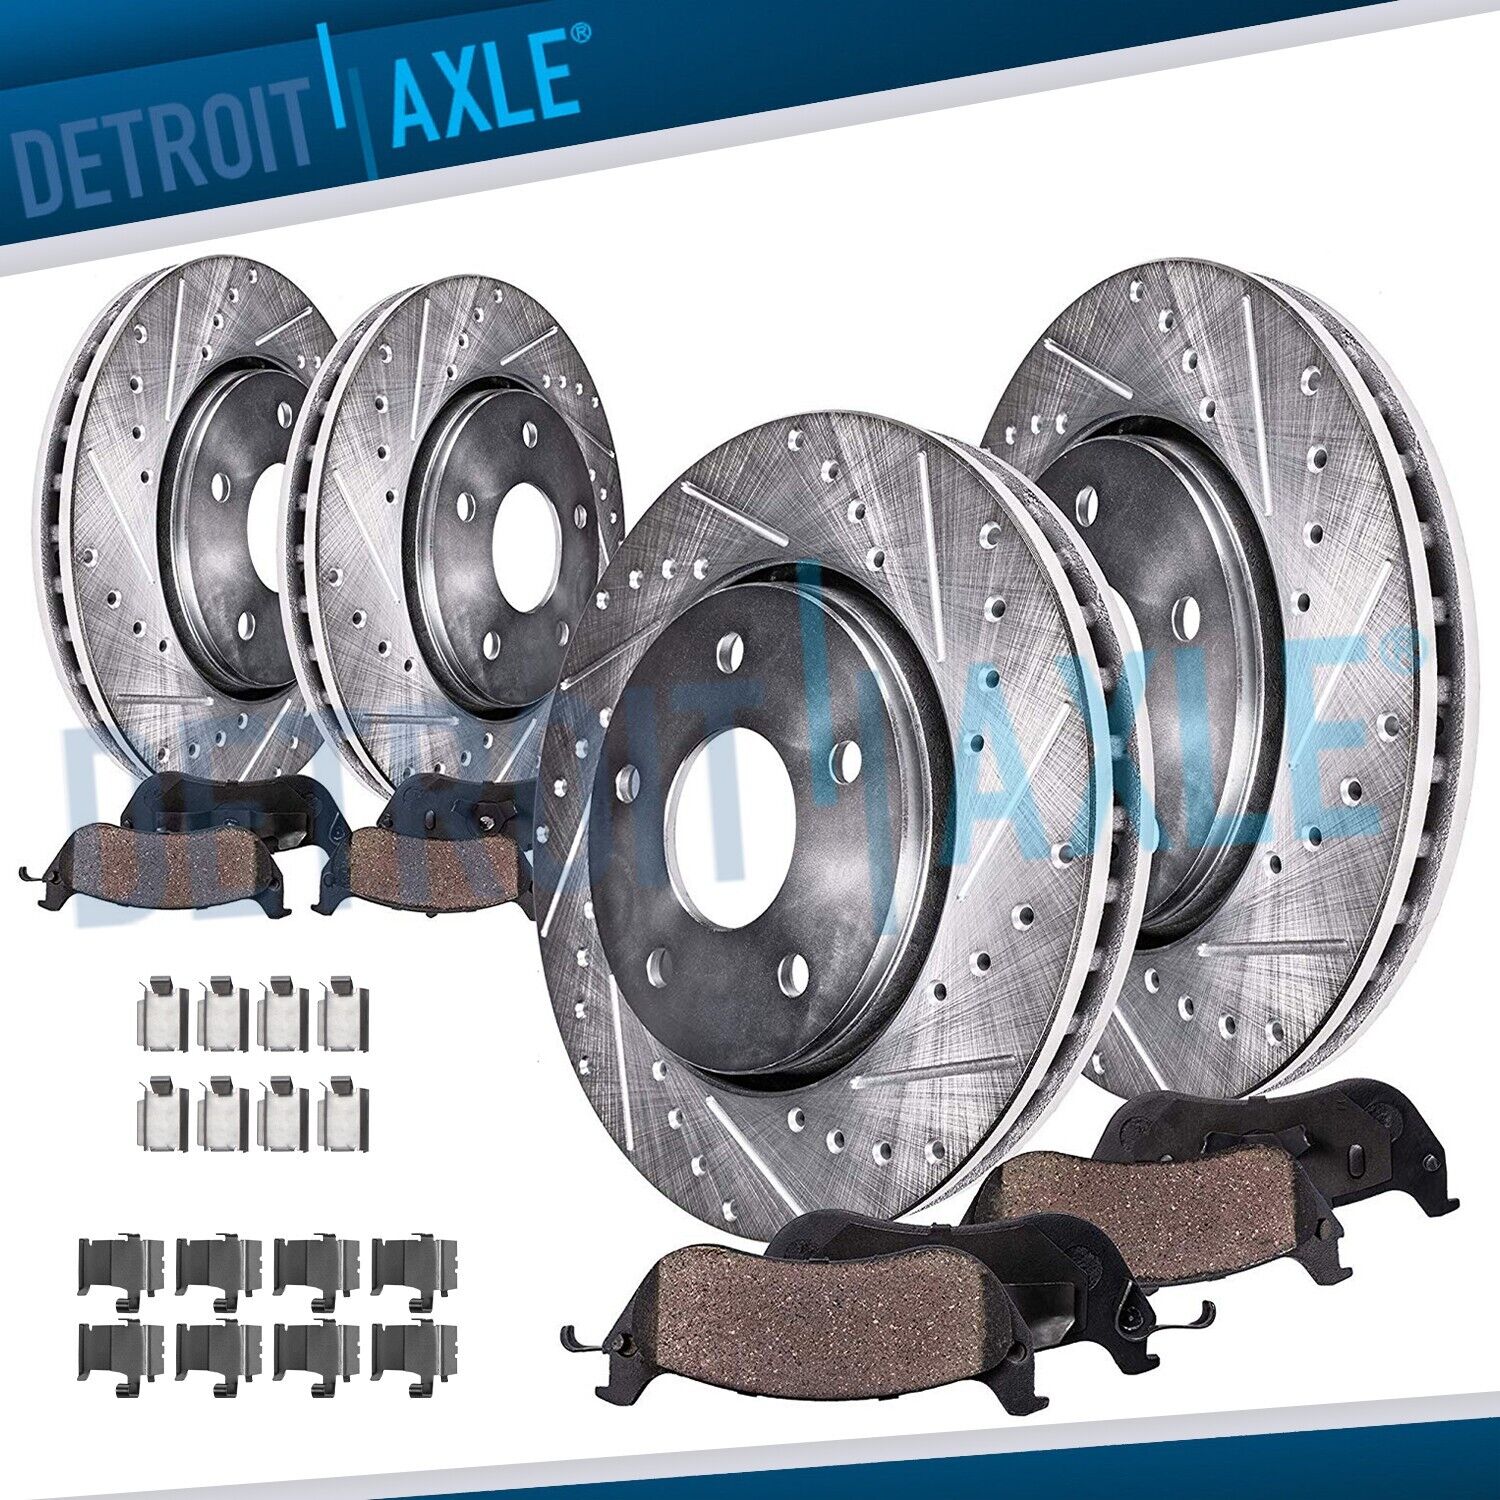 Front Rear Drilled Rotors and Brake Pads for Ford Flex Explorer Lincoln MKT MKS